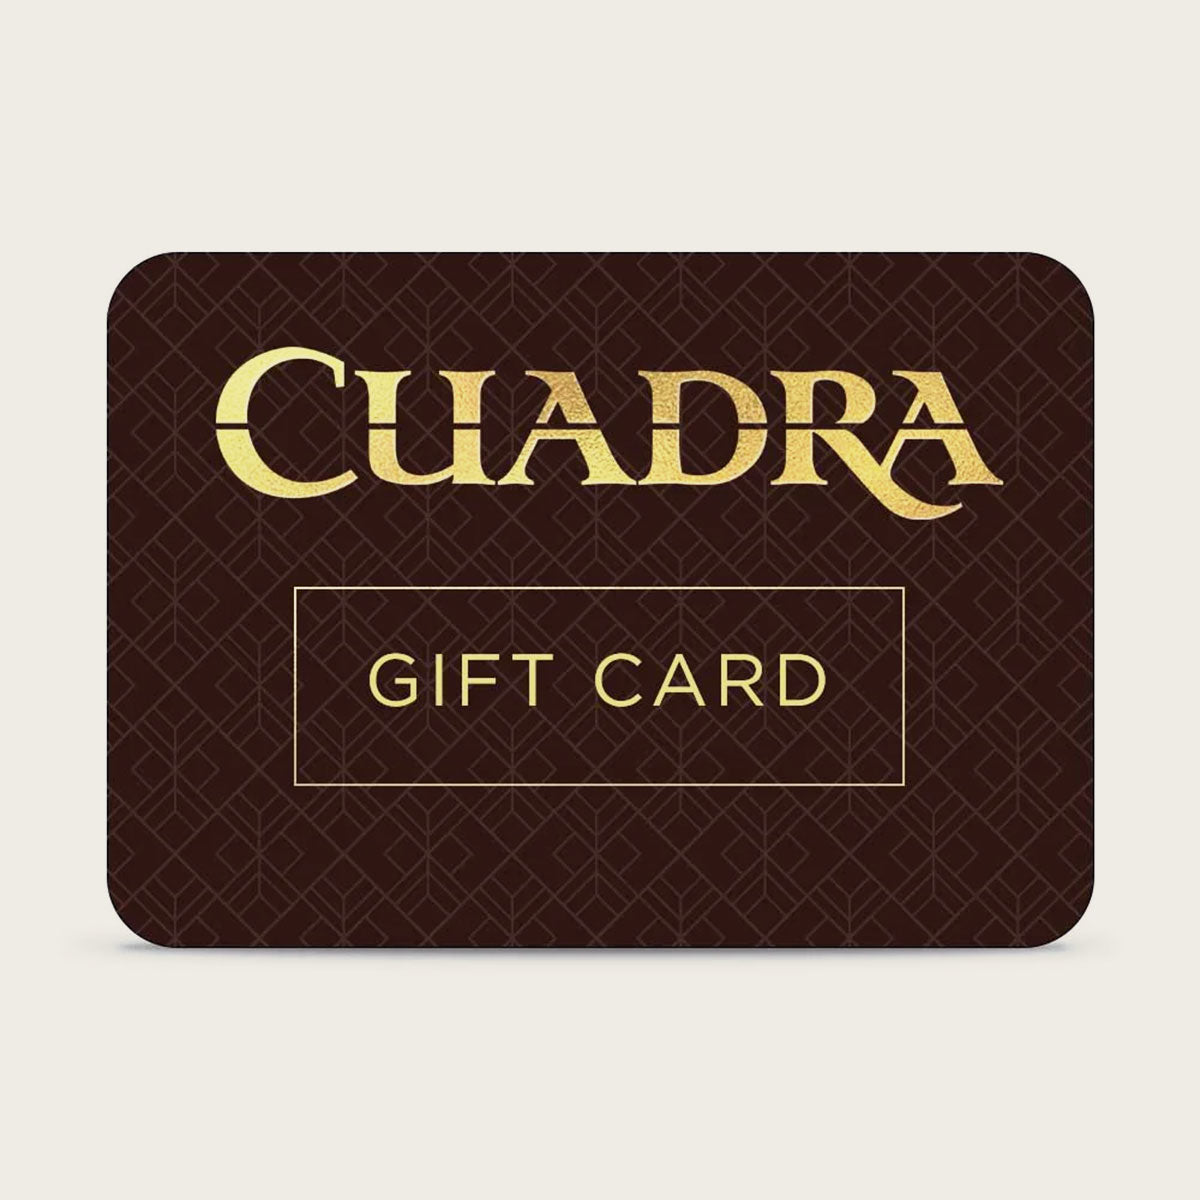 Available in various denominations, our Gift Cards offer the flexibility for recipients to select their desired footwear.